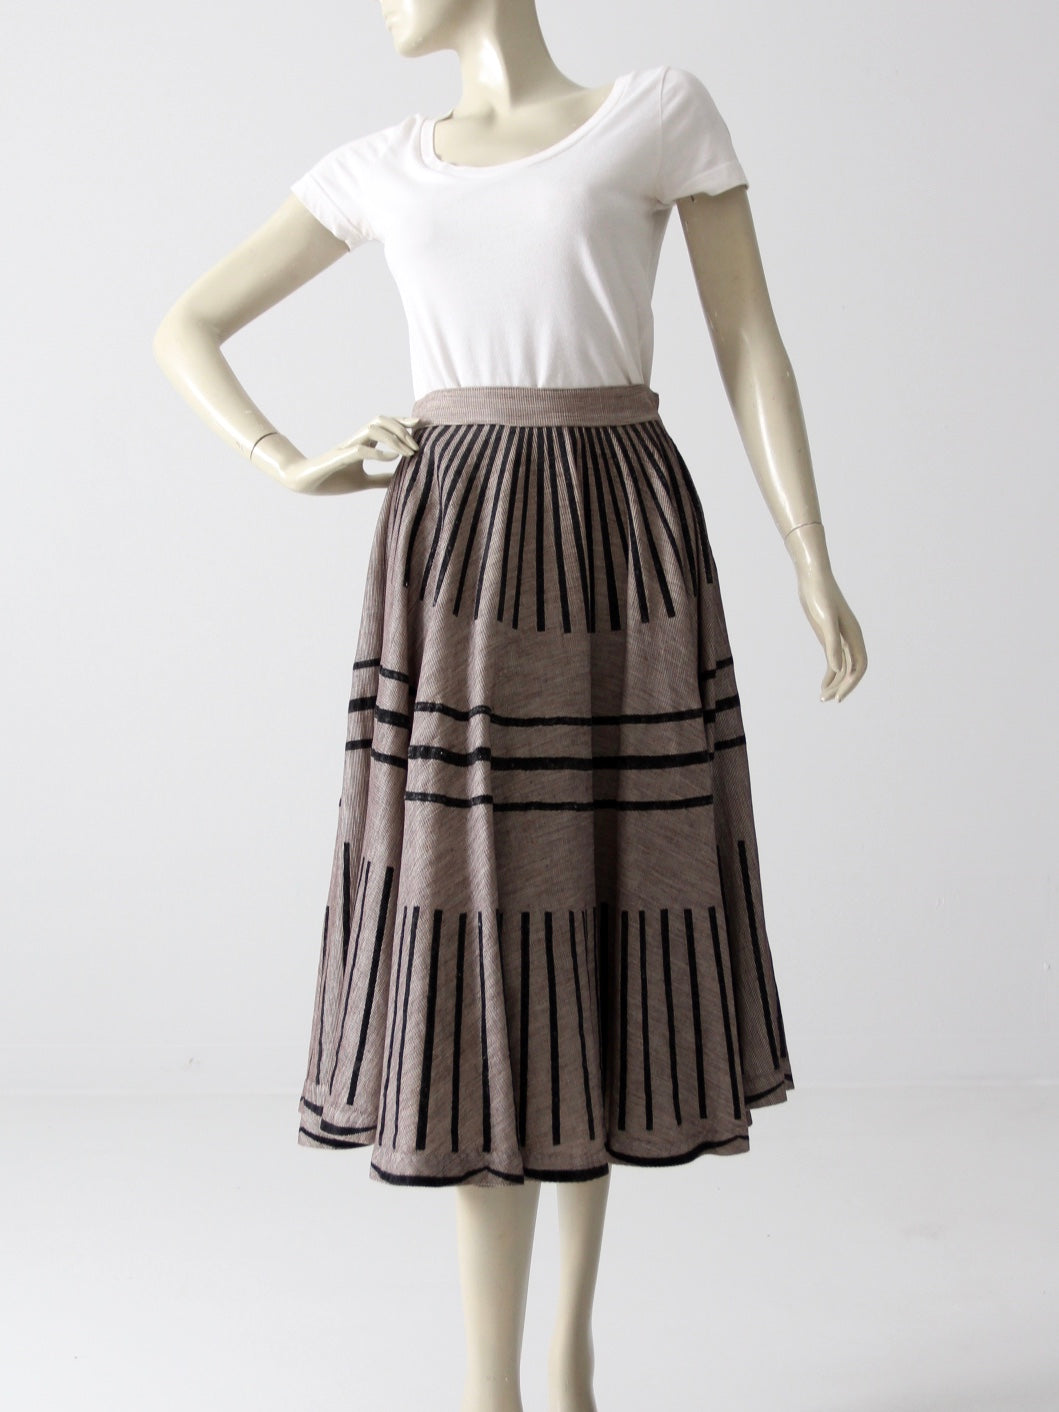 1950s New Look style skirt